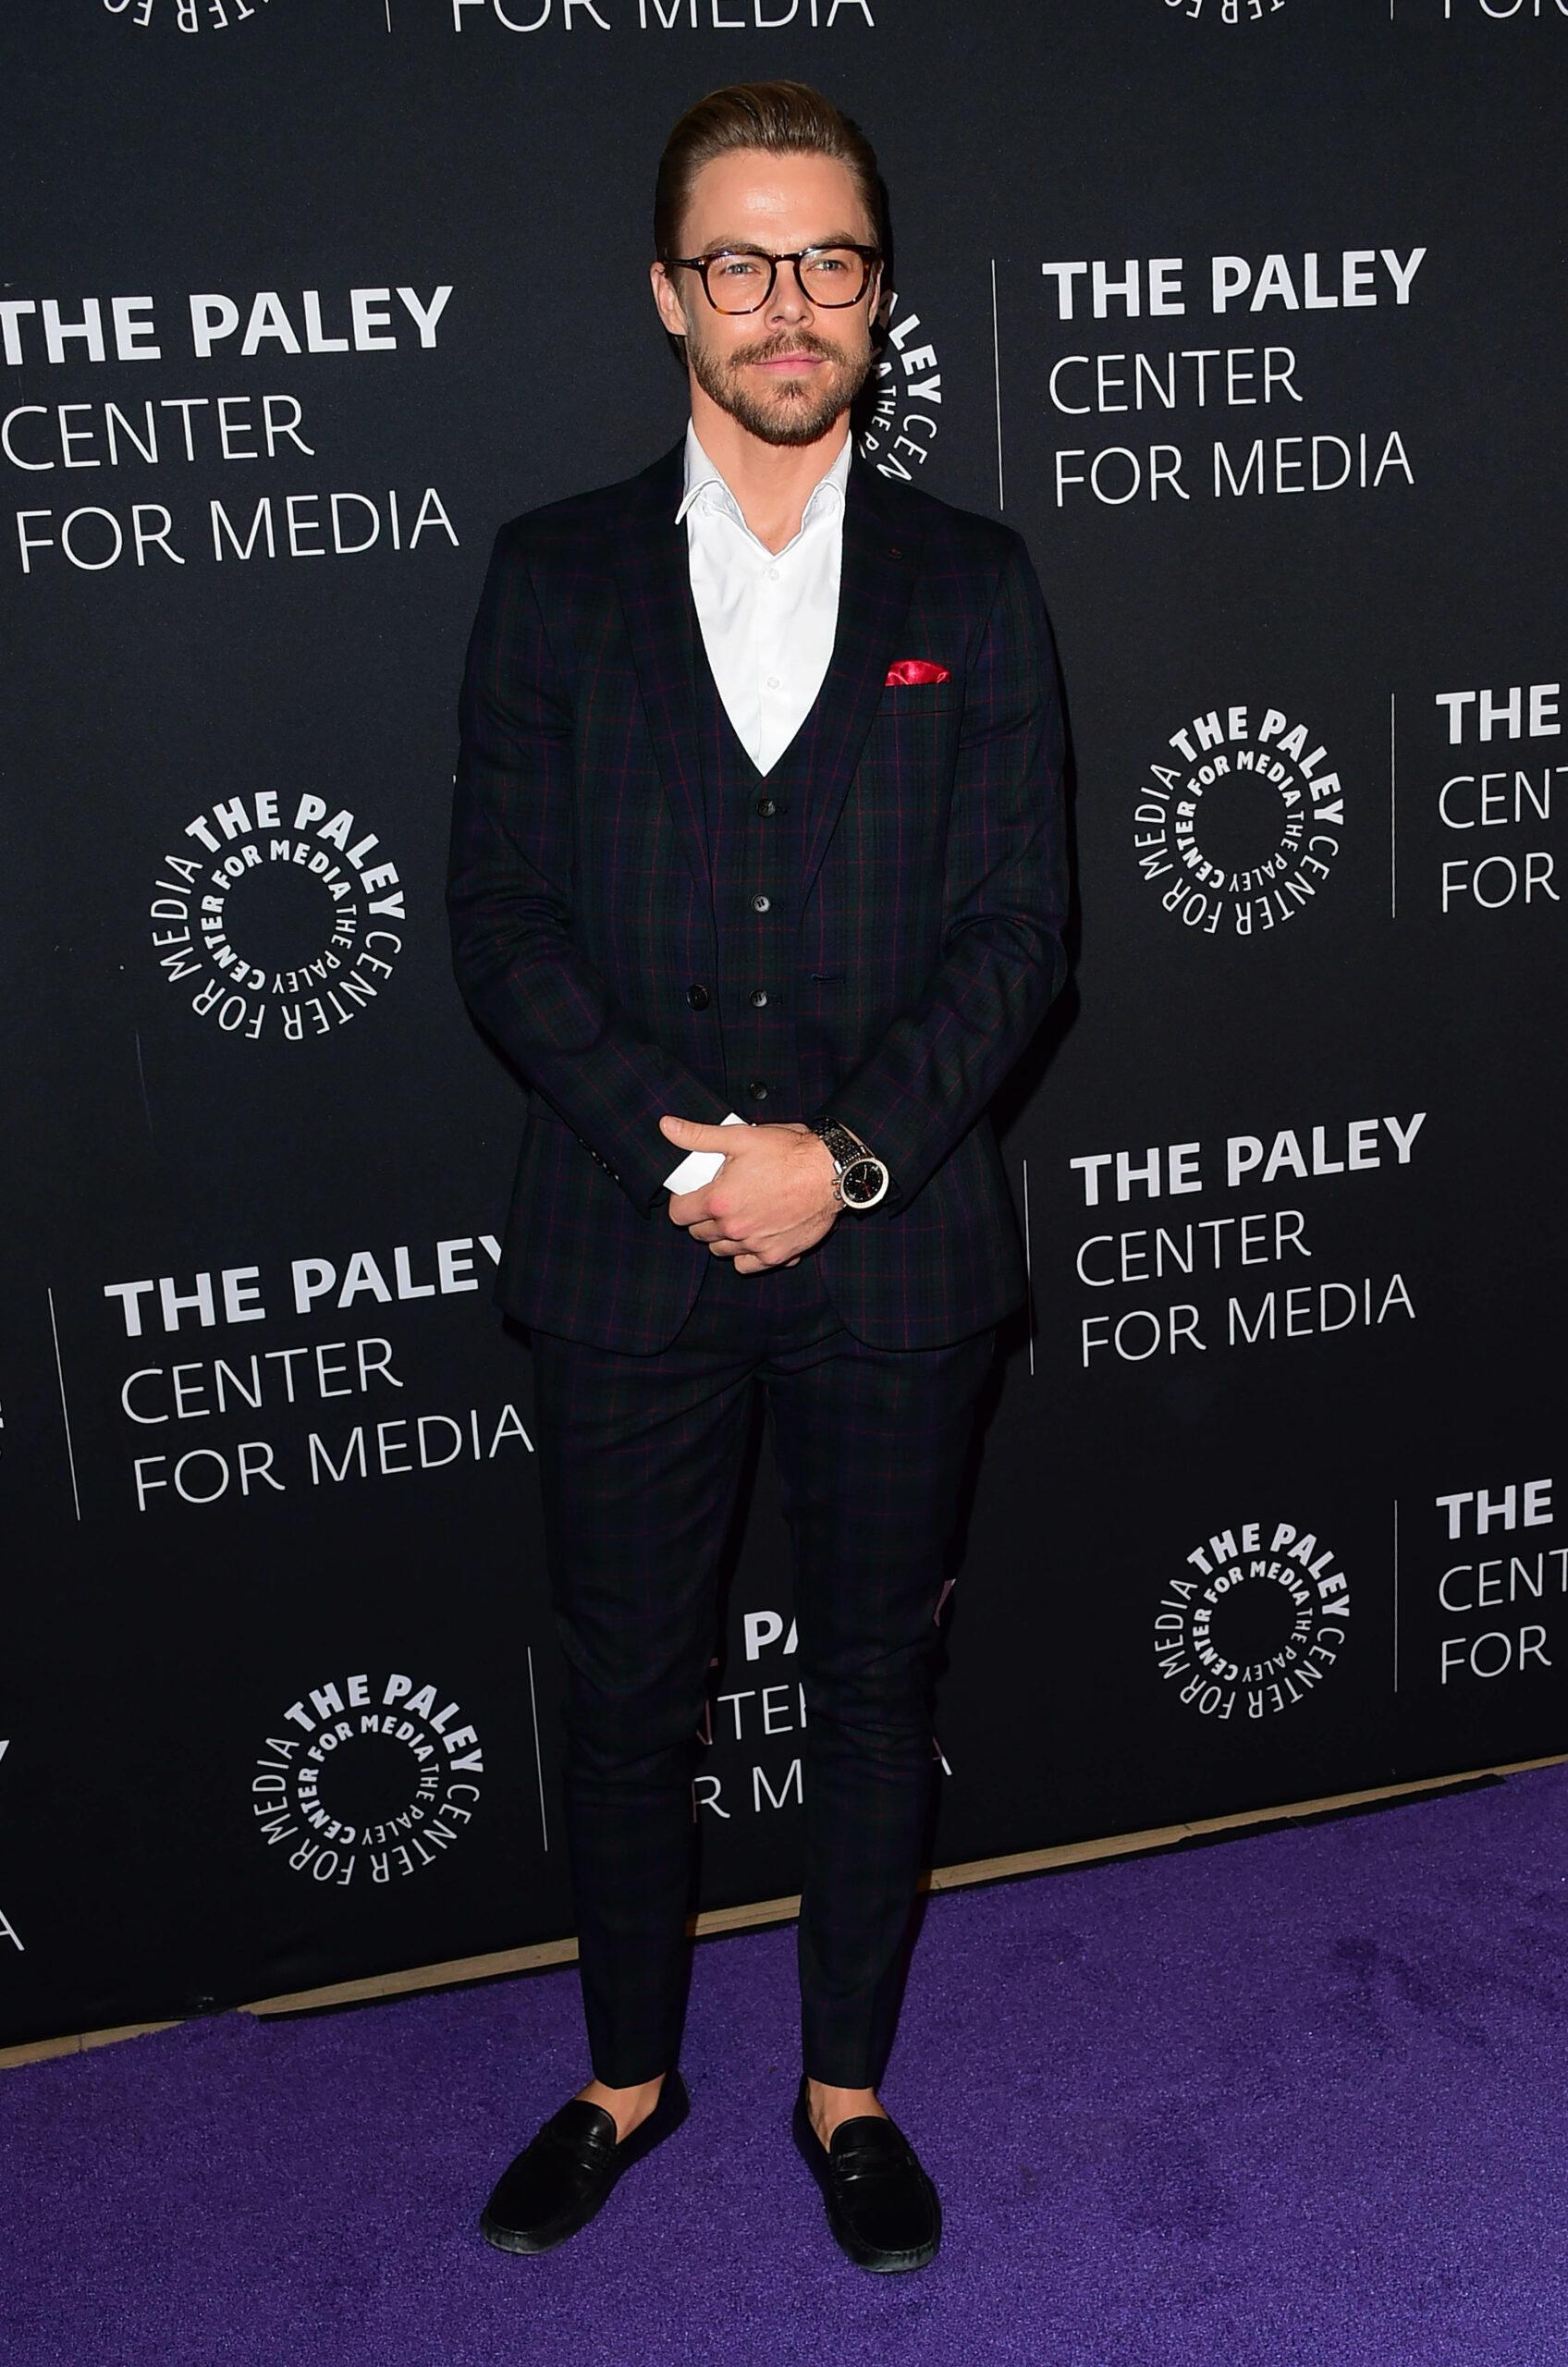 The Paley Center For Media Presents An Evening With Derek Hough And Julianne Hough